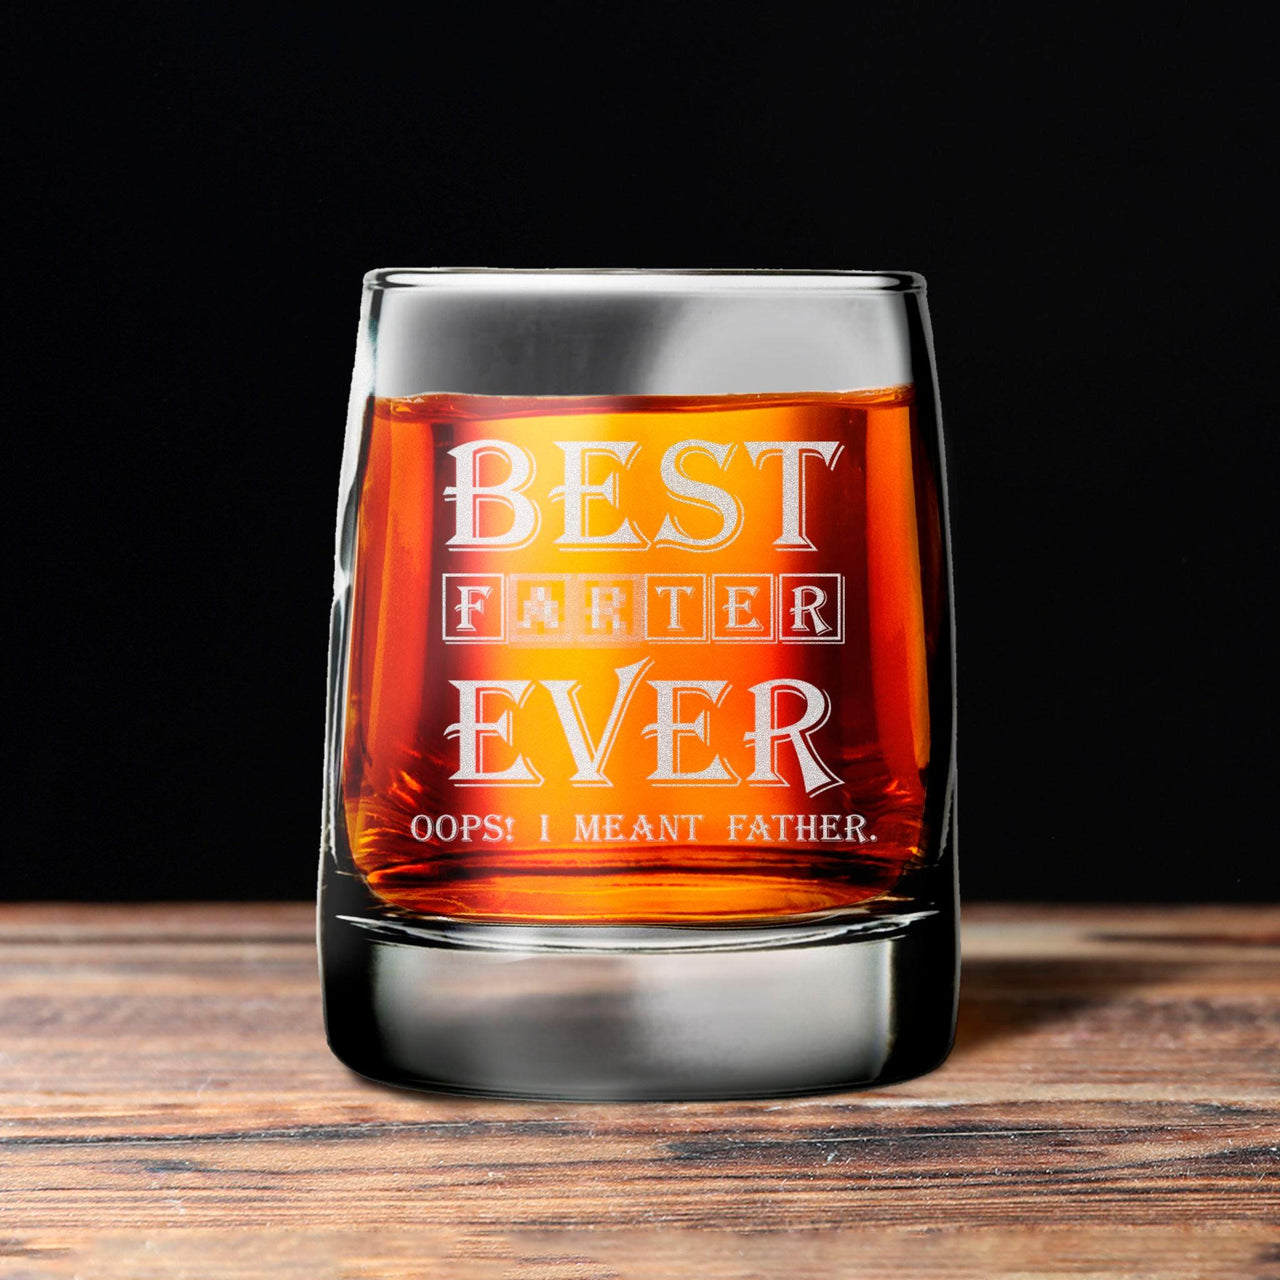 Old Fashioned 12 oz Whiskey Glass - Dad's Gift Personalized Drink Broquet Best Farter Ever 